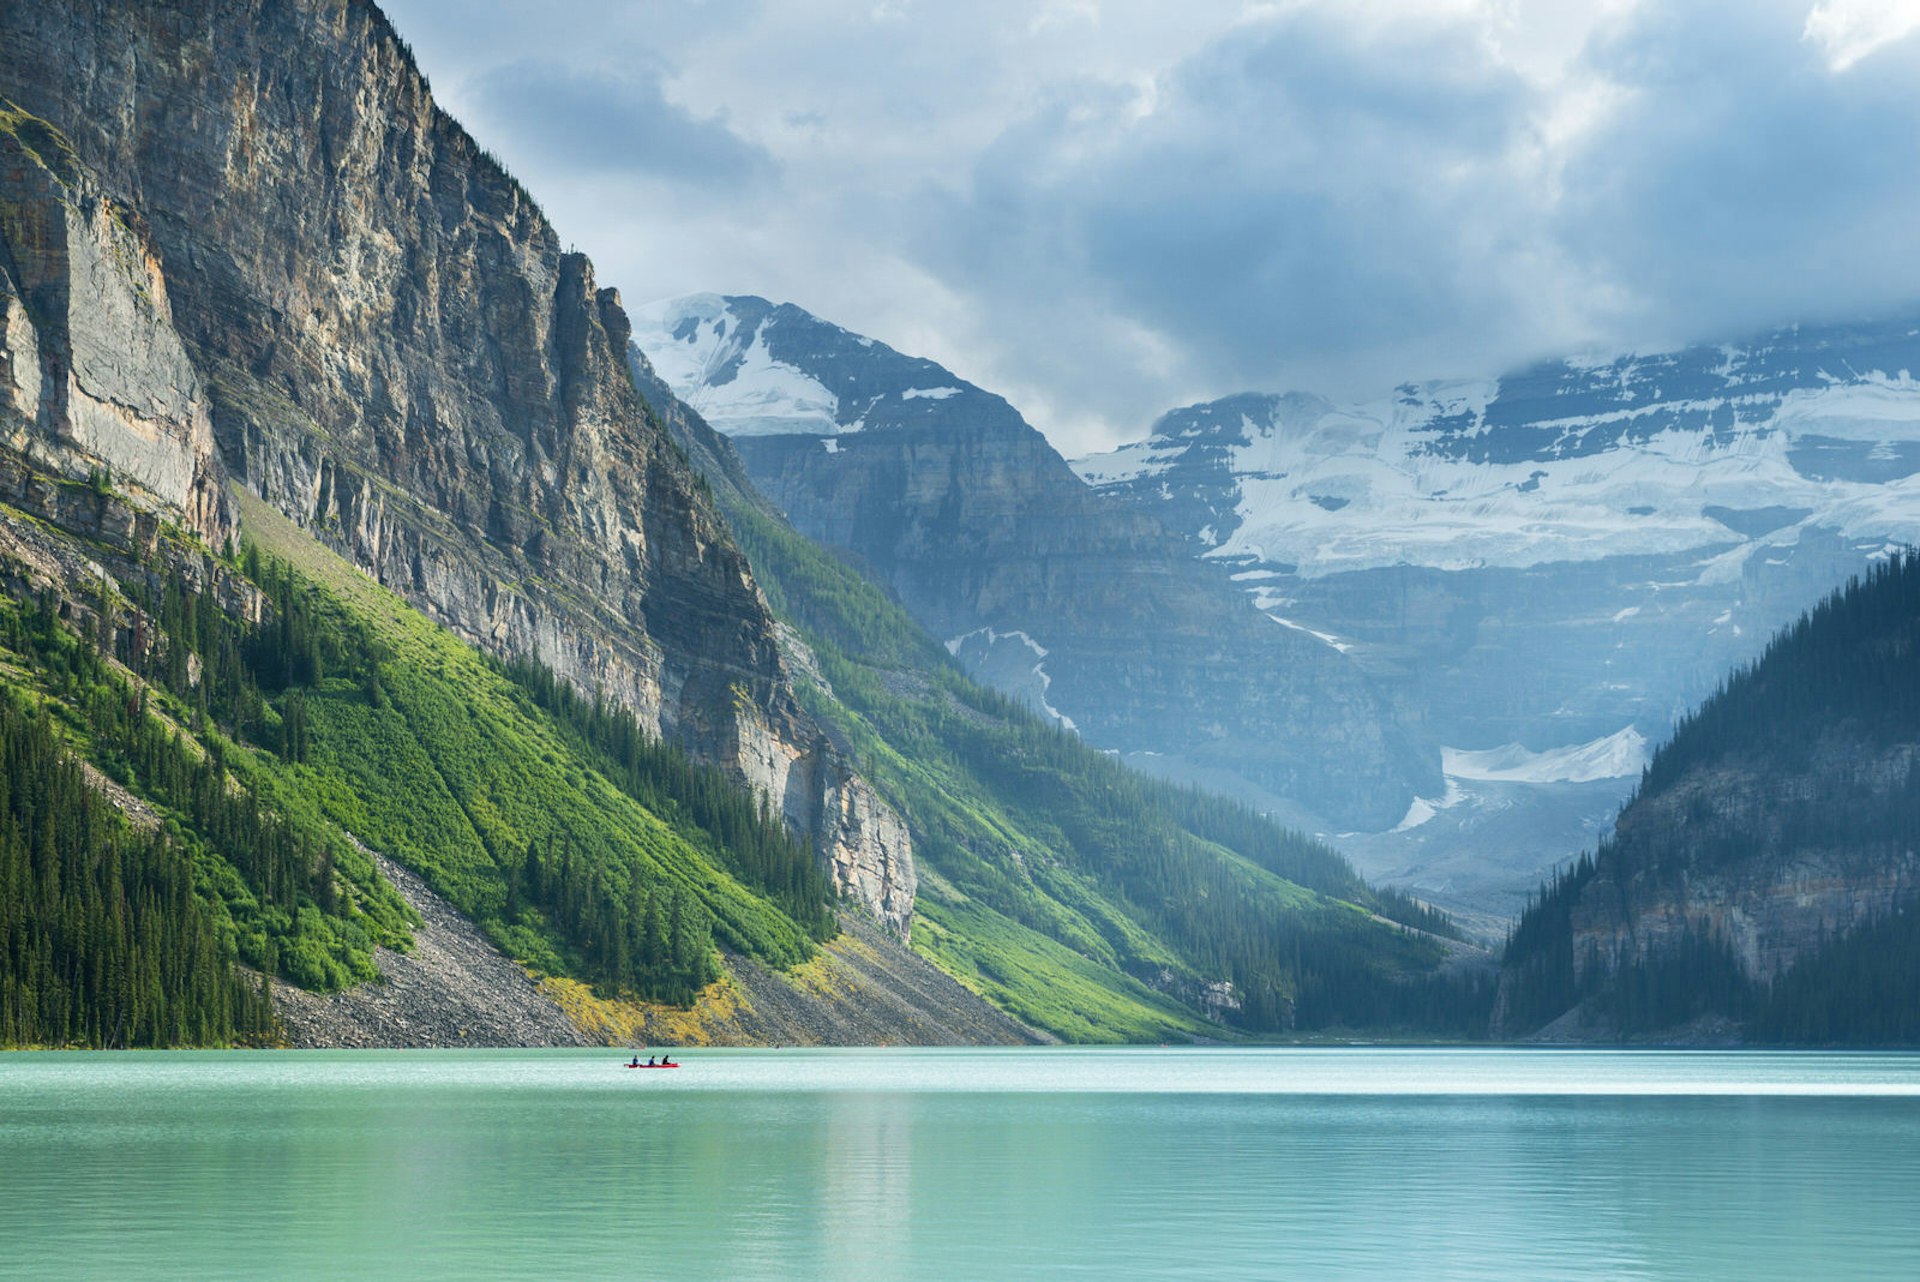 Fed by glaciers, Lake Louise is known for its turquoise hue © Justin Foulkes / Lonely Planet 